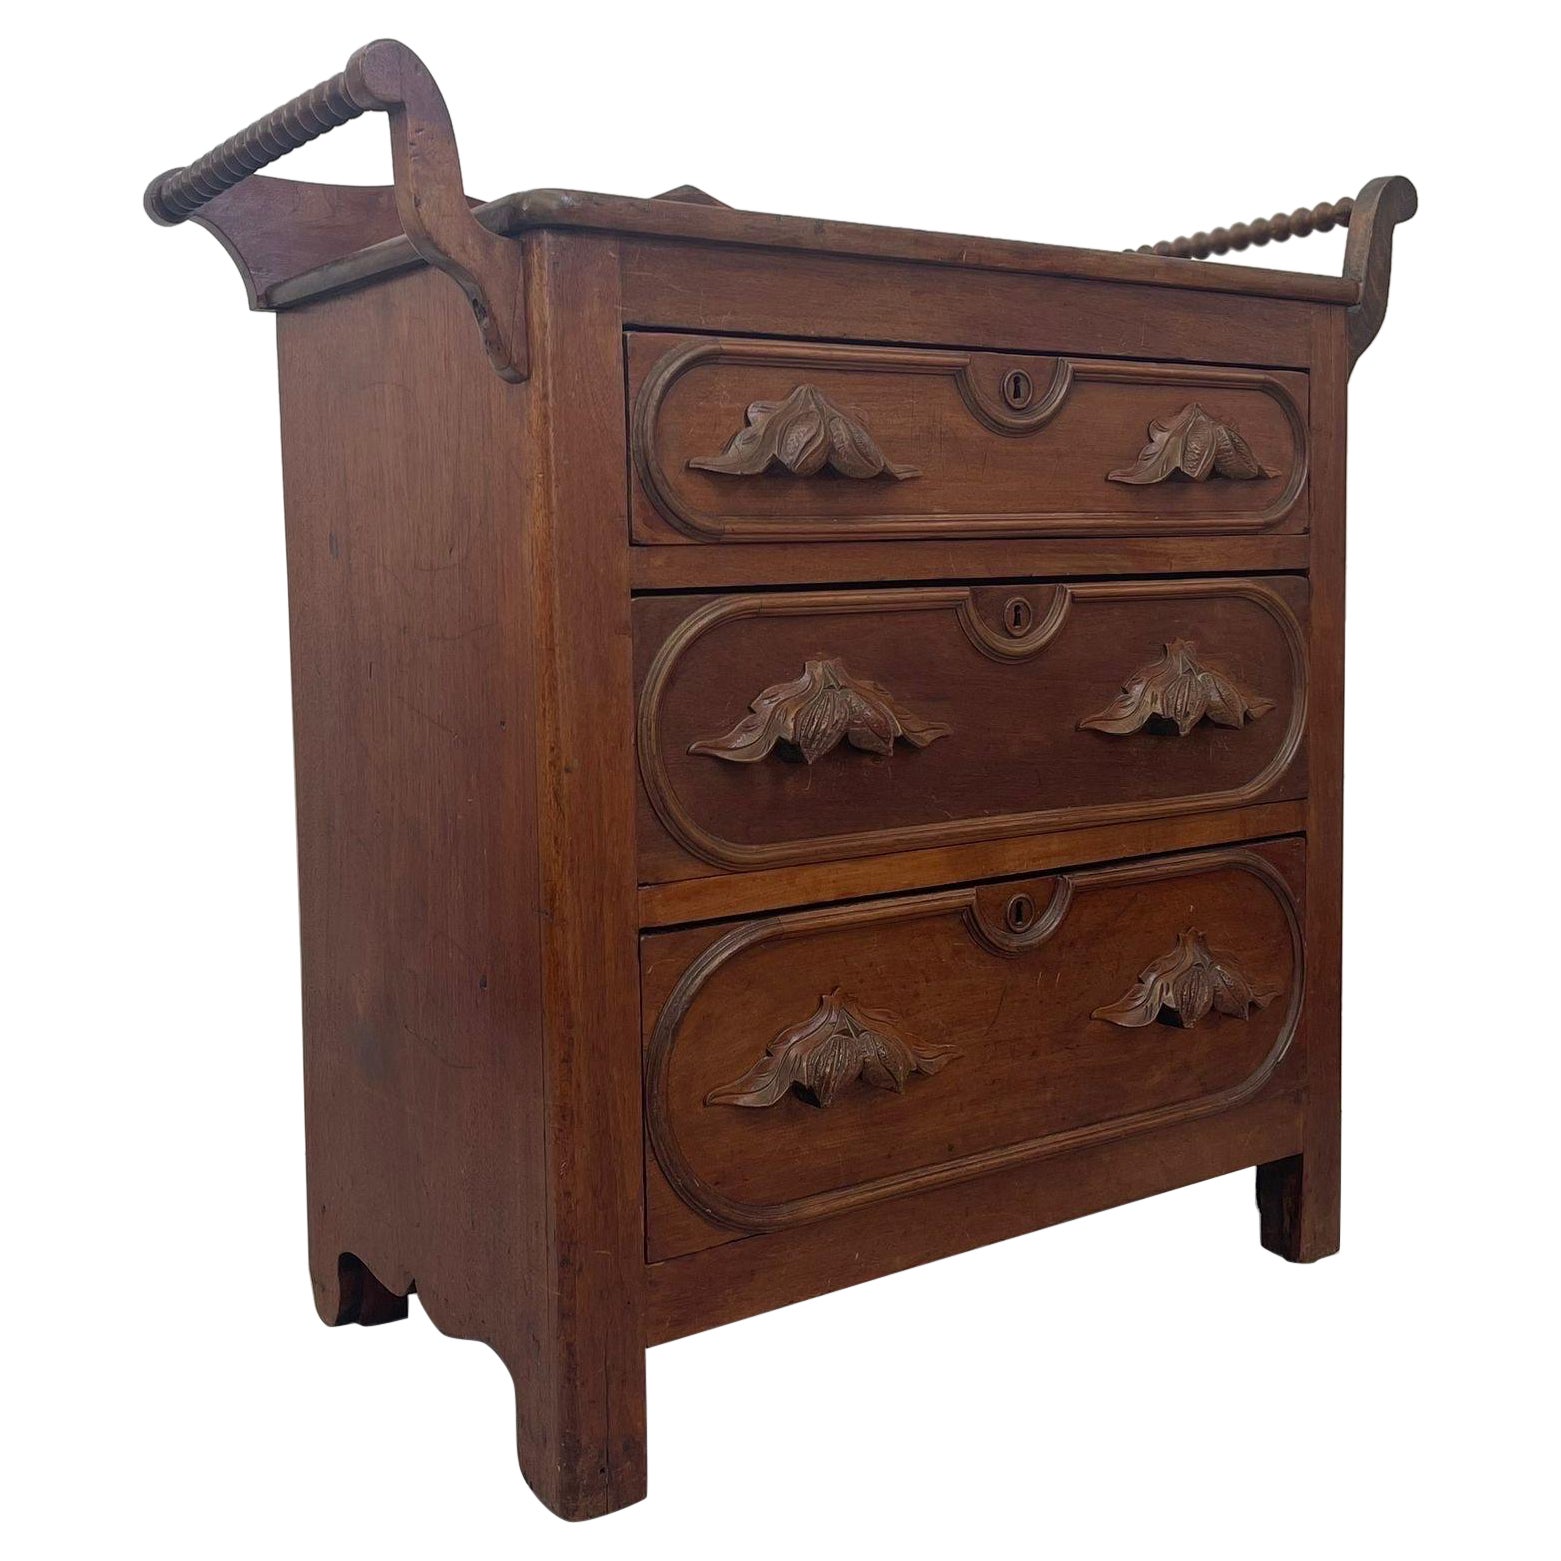 Vintage Eastlake Victorian Style Dresser With Hand Carved Accents. For Sale